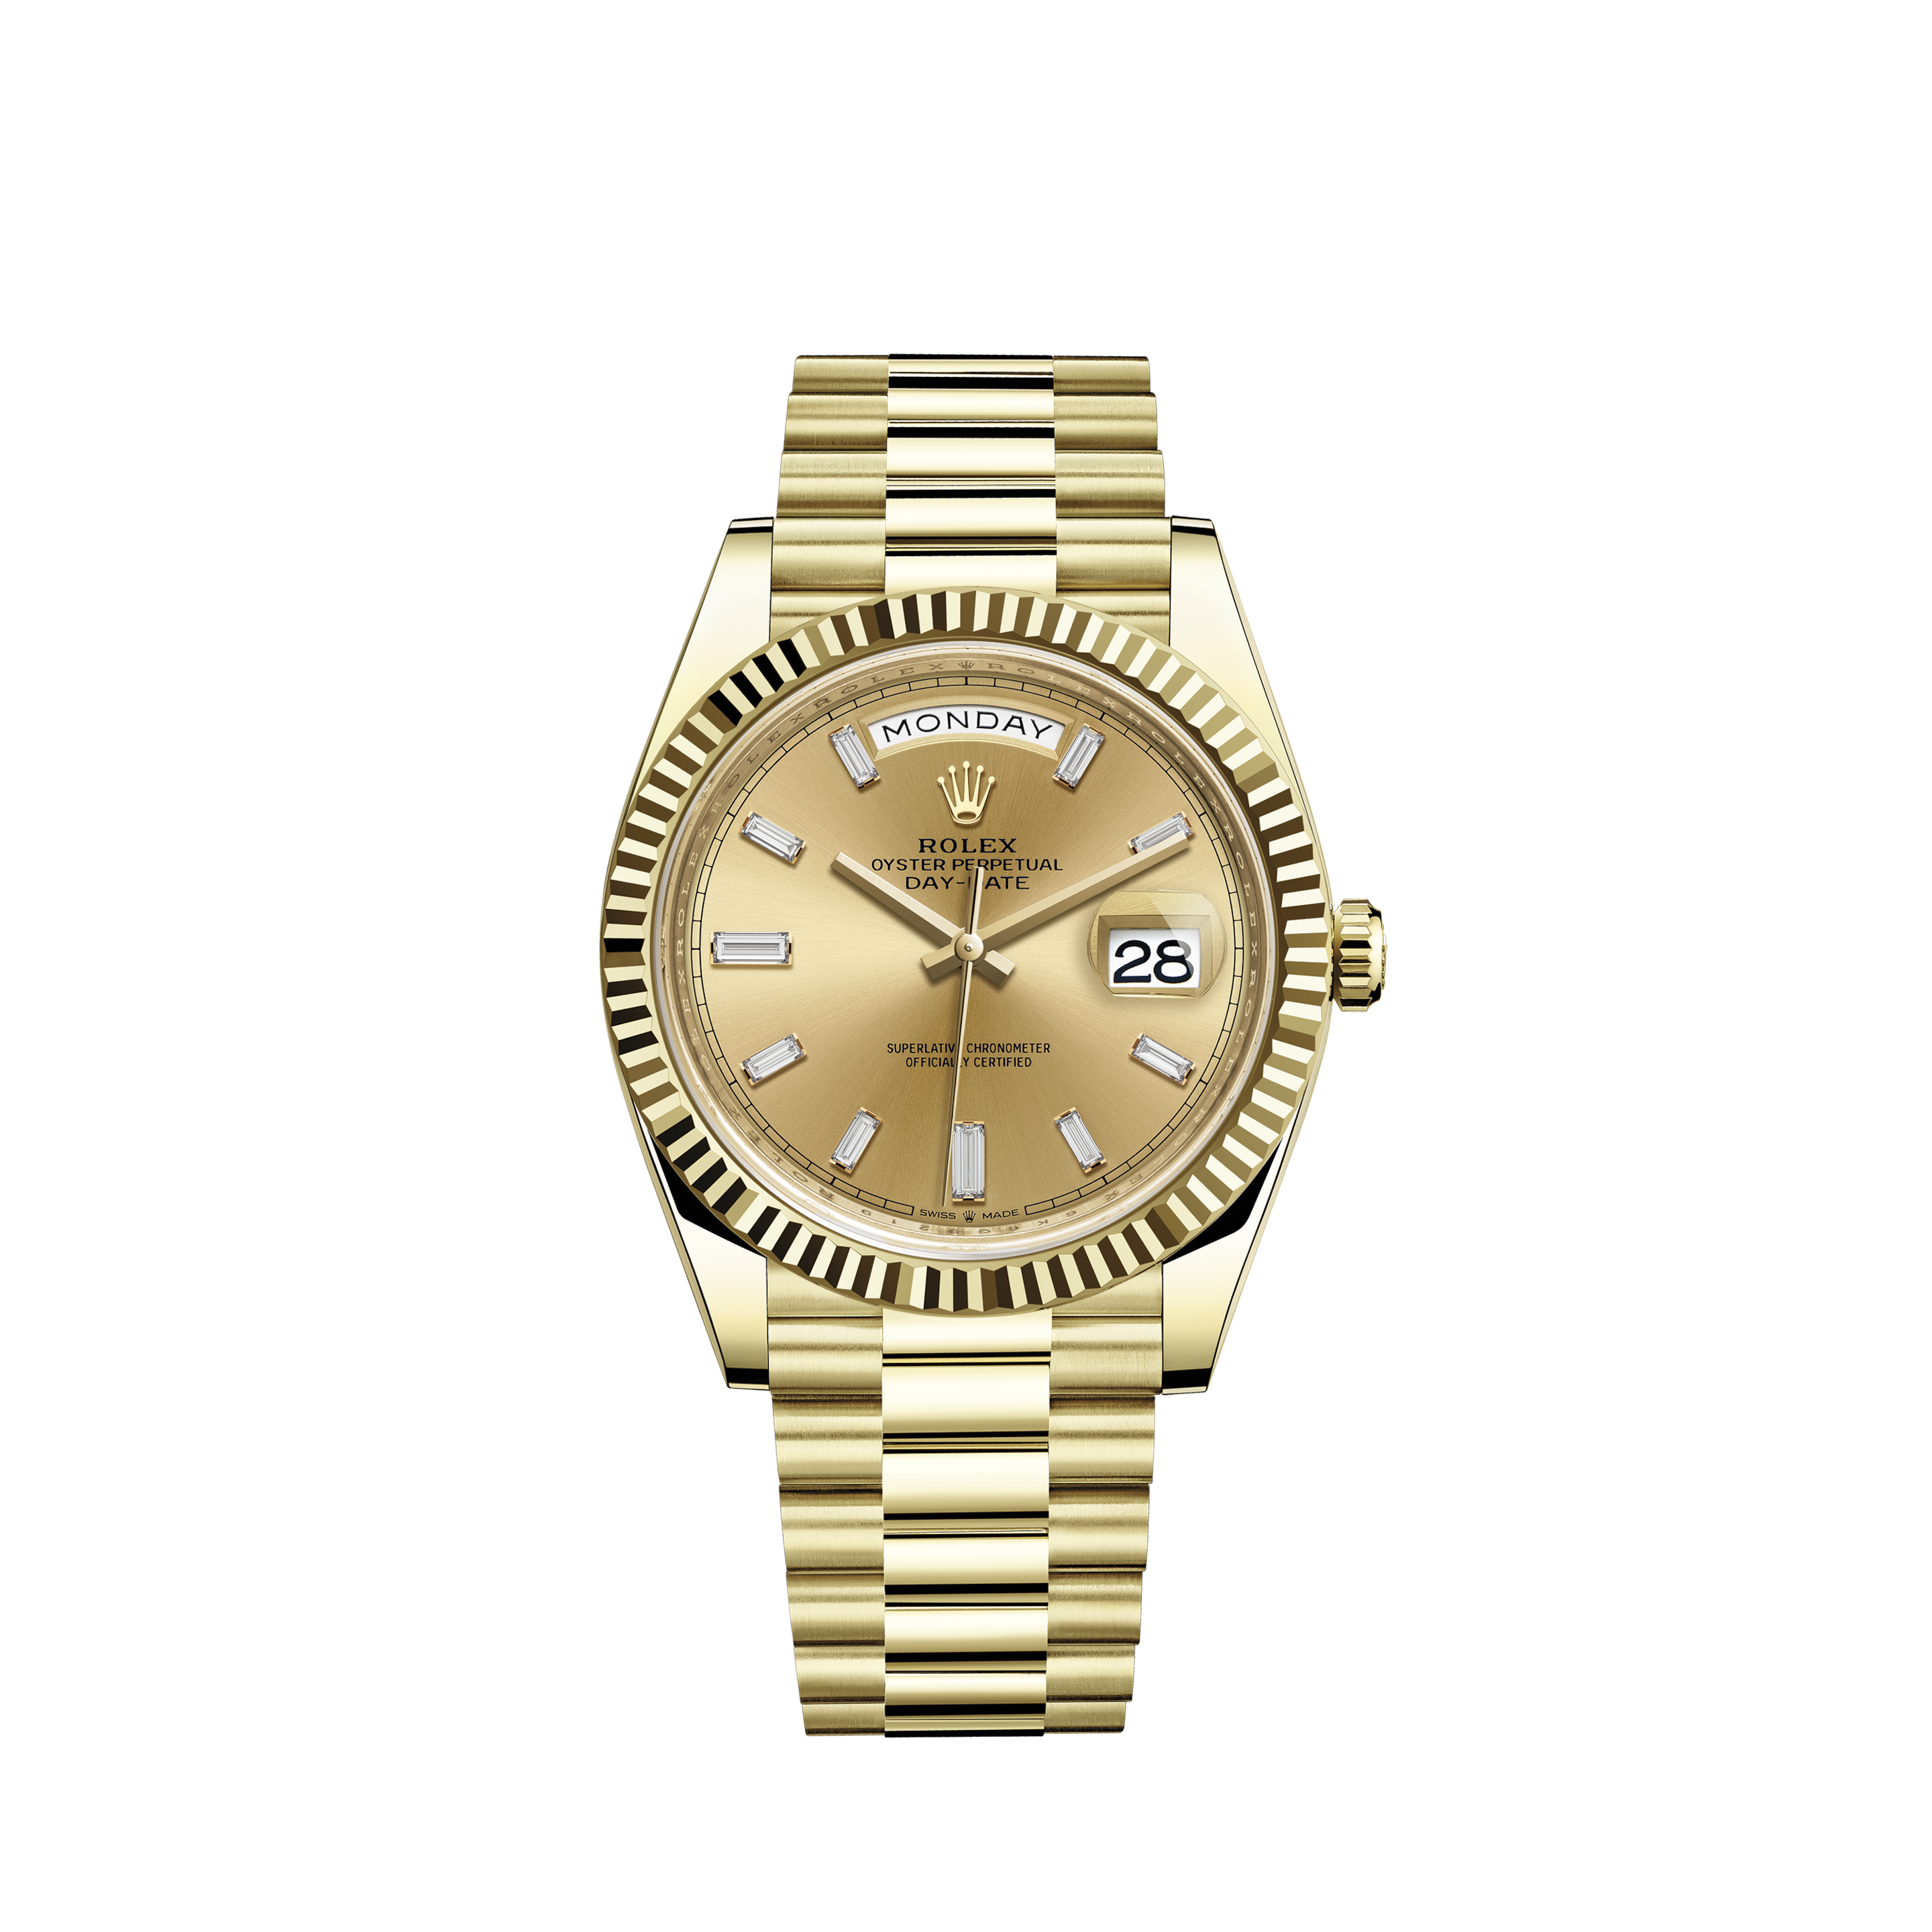 Rolex Datejust Steel White Gold MOP Saphire Ladies Watch 79174 Box PapersRolex Datejust Steel White Gold Mother of Pearl Ladies Watch 69174